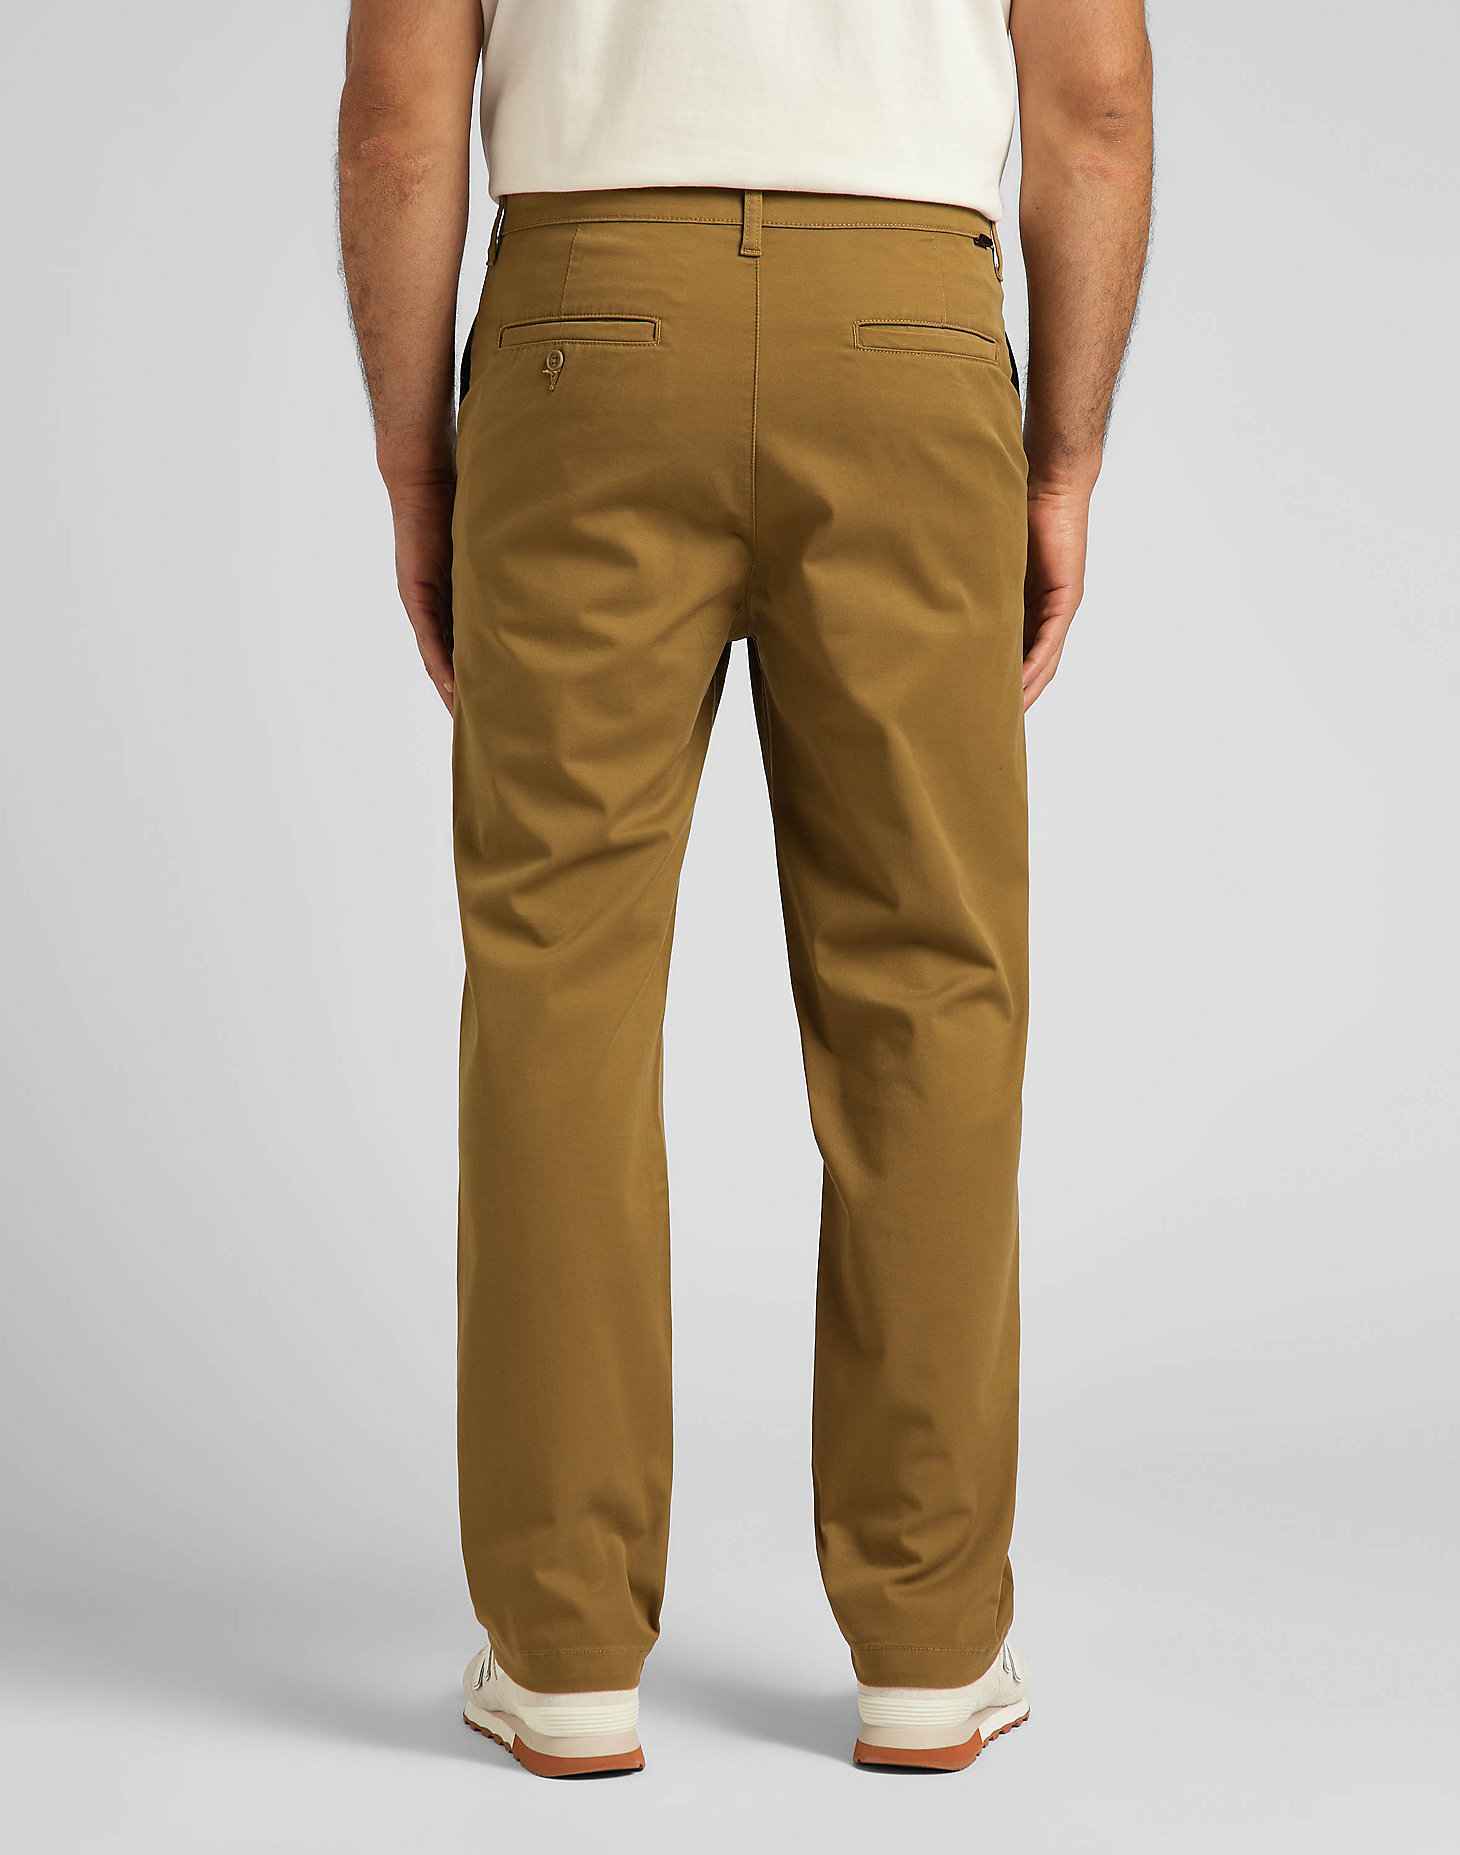 Relaxed Chino in Tumbleweed alternative view 1